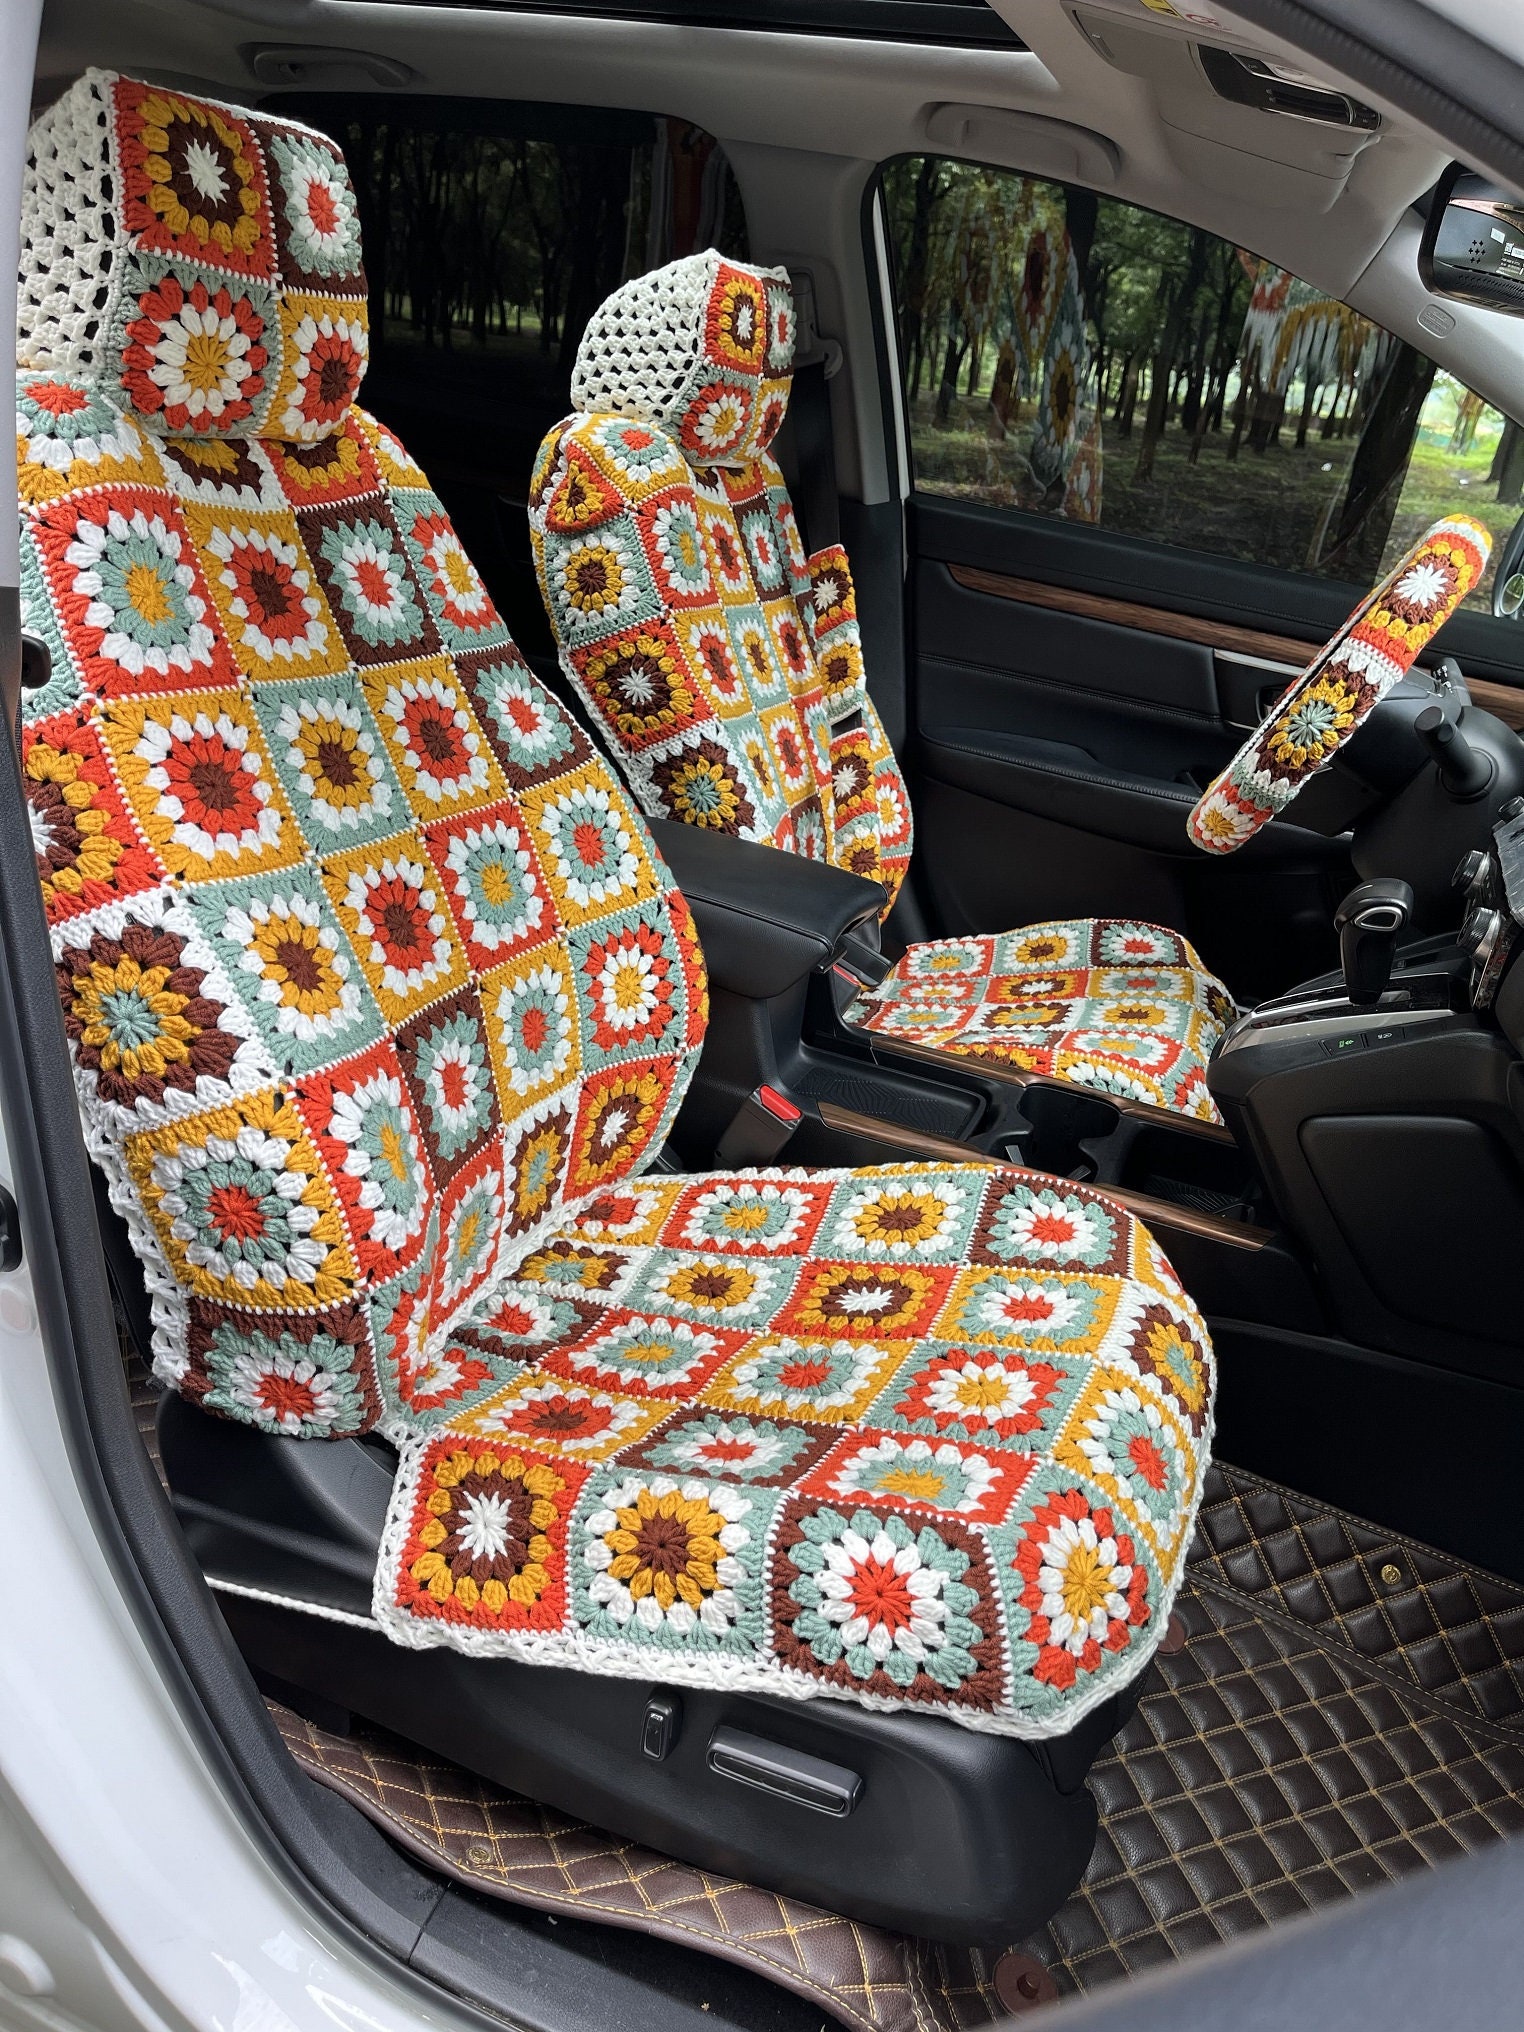 Buy Car Seat Cover,crochet Seat Covers,rainbow Granny Square Steering Wheel Cover  Seat Cover Headrest Covers Car Accessories,car Interior Design Online in  India 